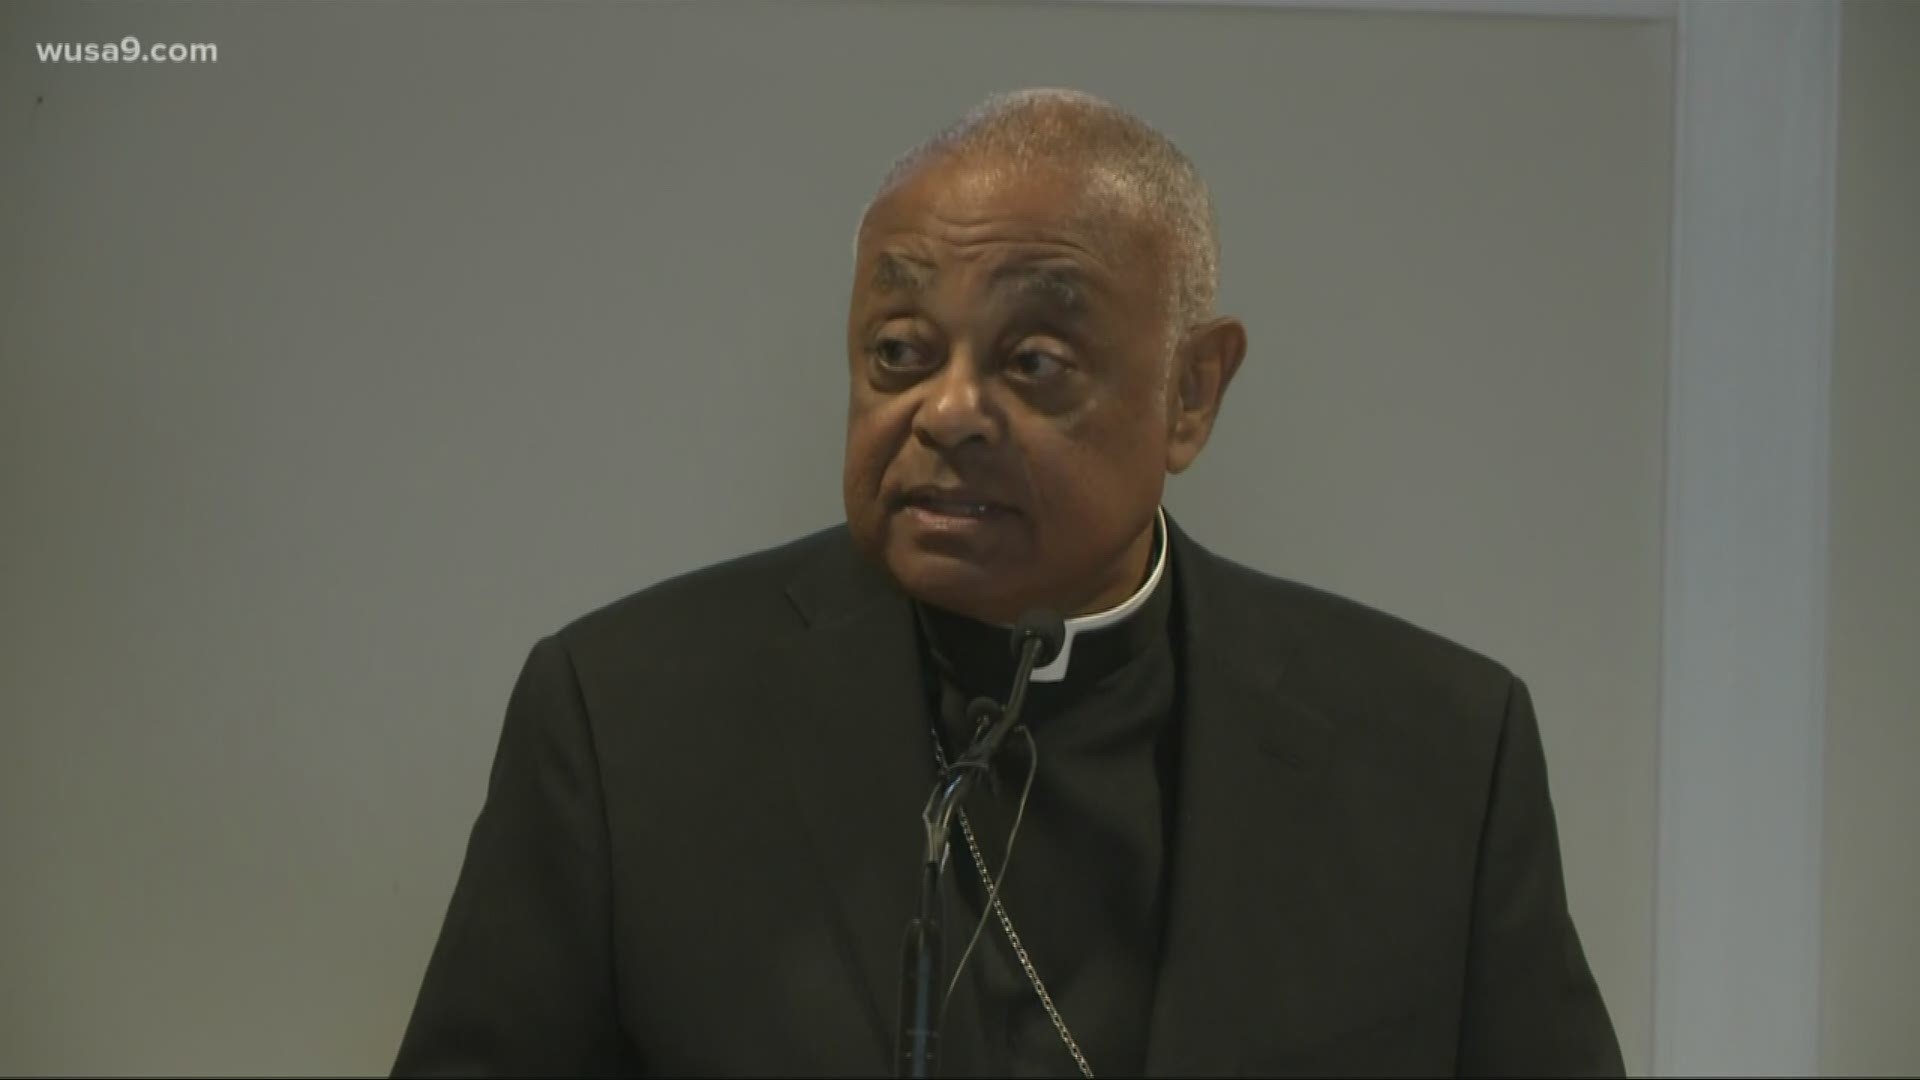 Archbishop Wilton Gregory will be the first African American to head the Washington archdiocese which includes parts of Maryland.